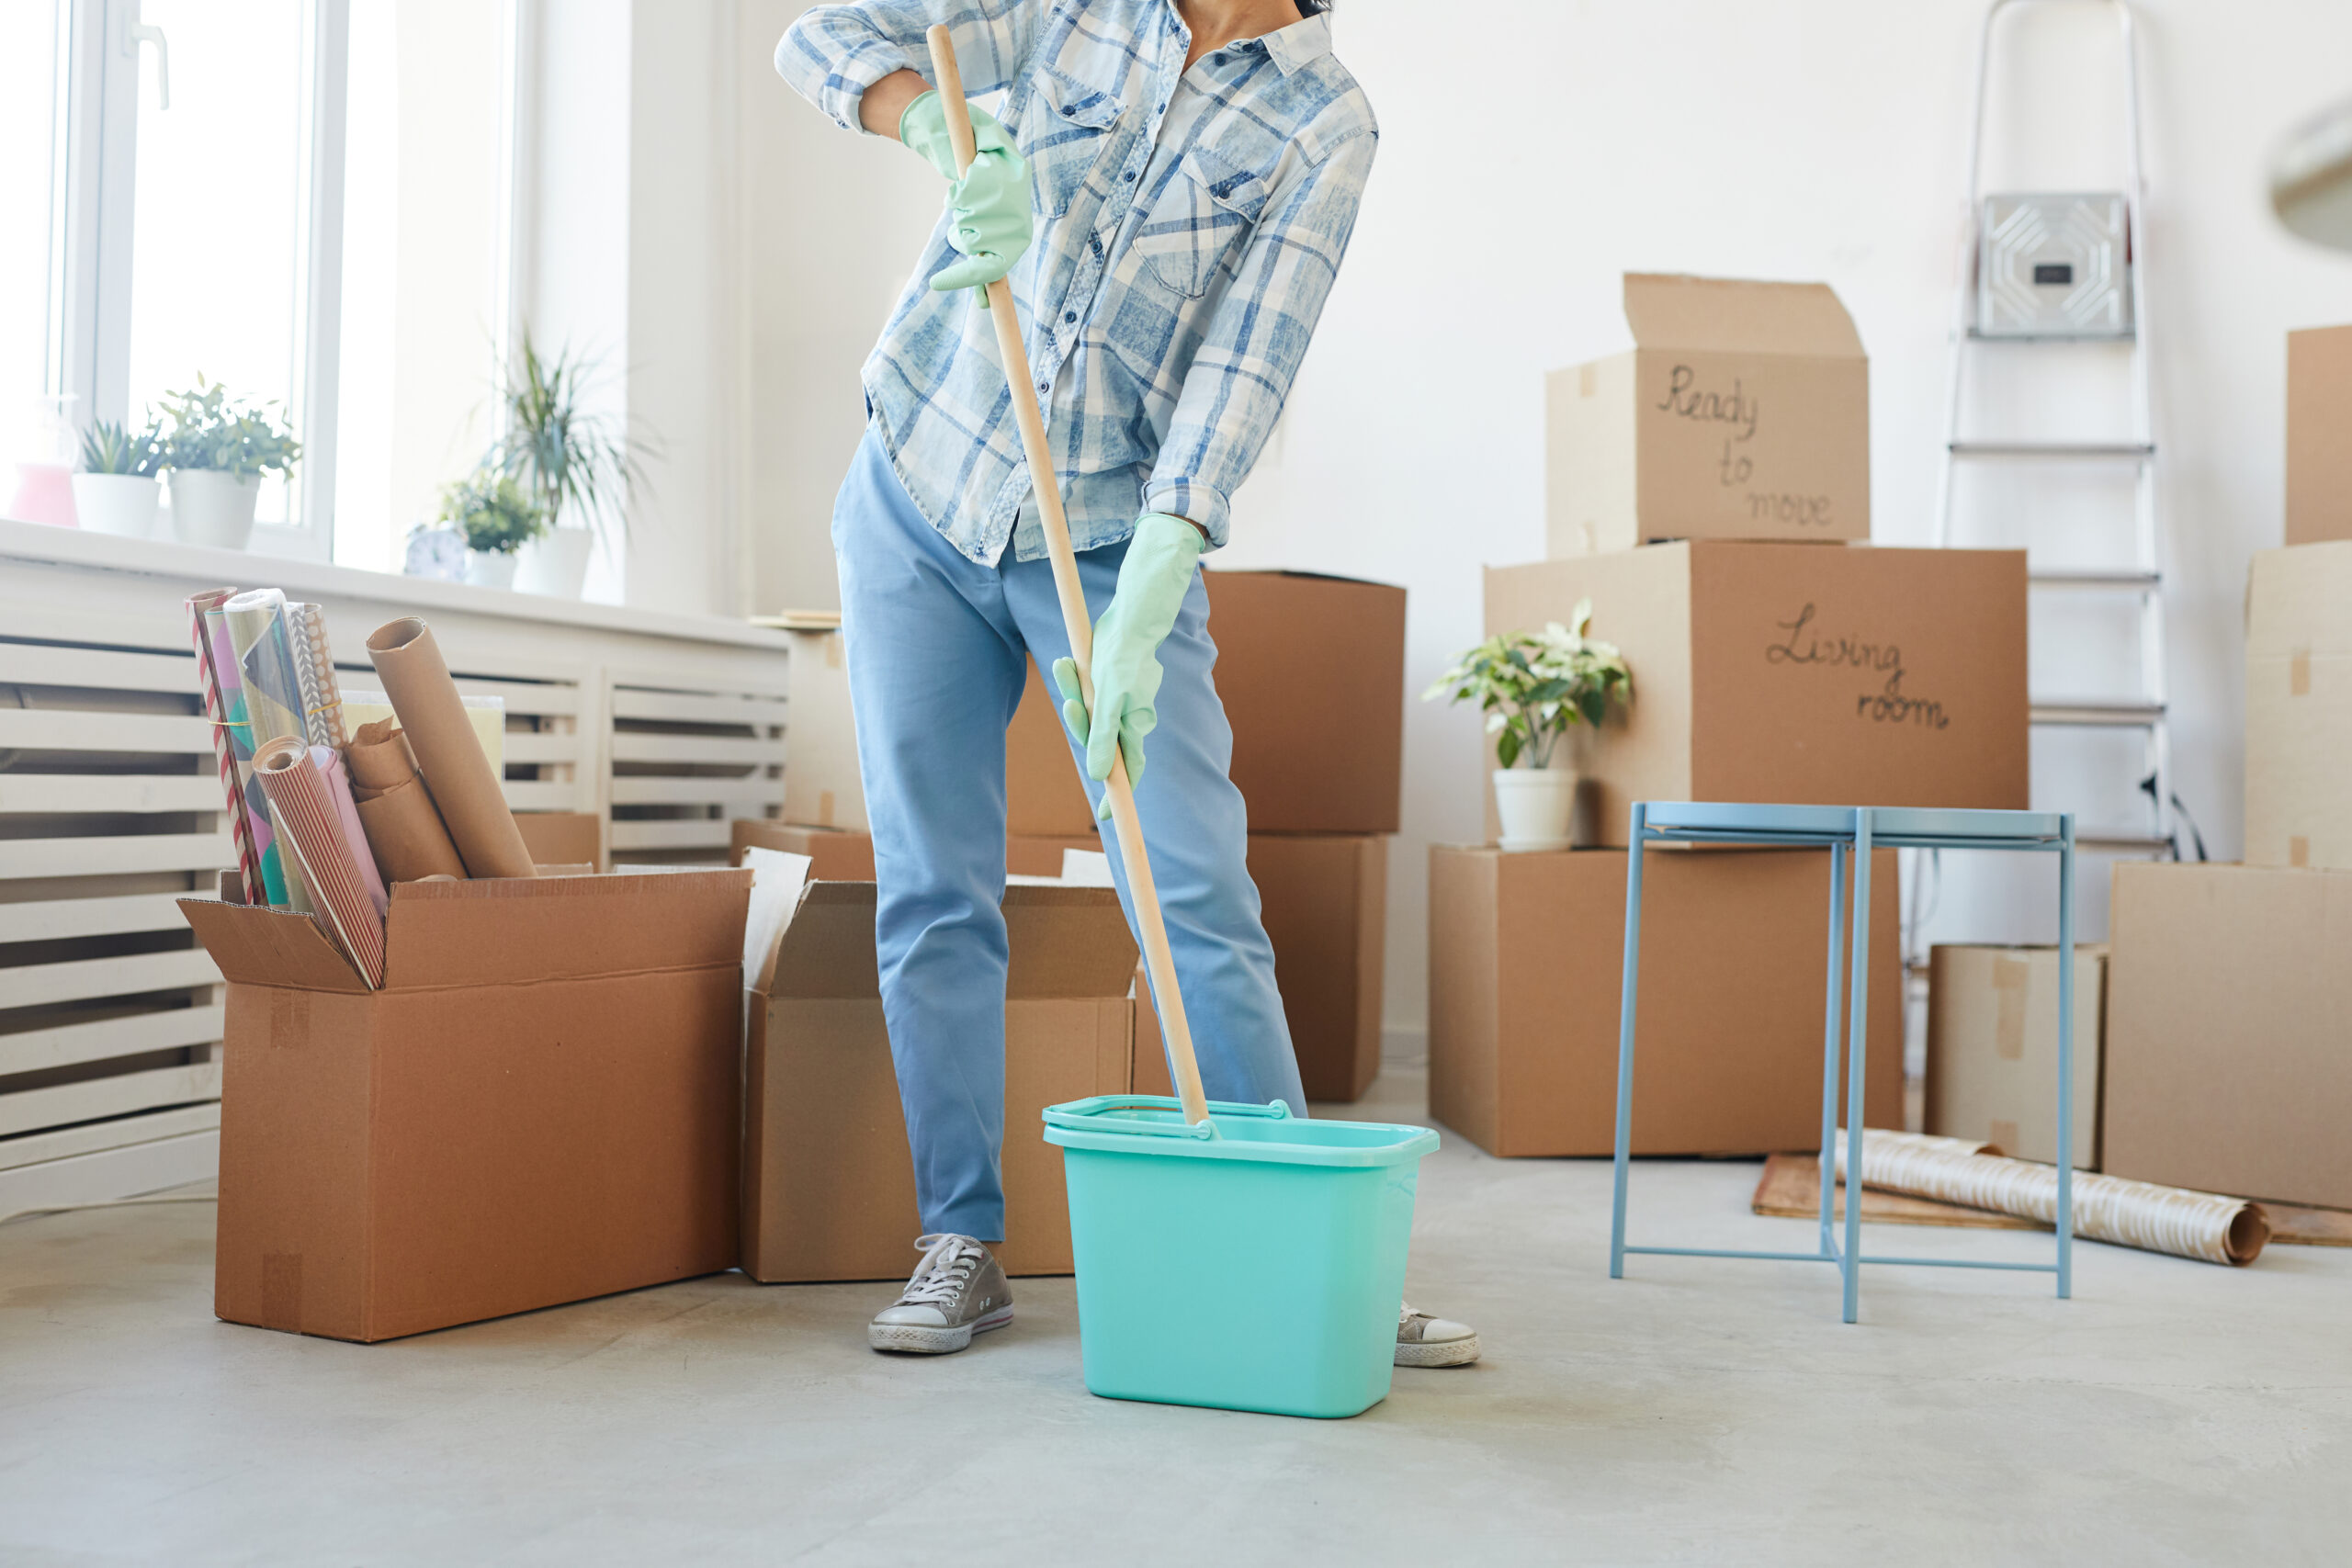 Cropped image of a person with a mop and mop bucket cleaning surrounded by cardboard moving boxes.